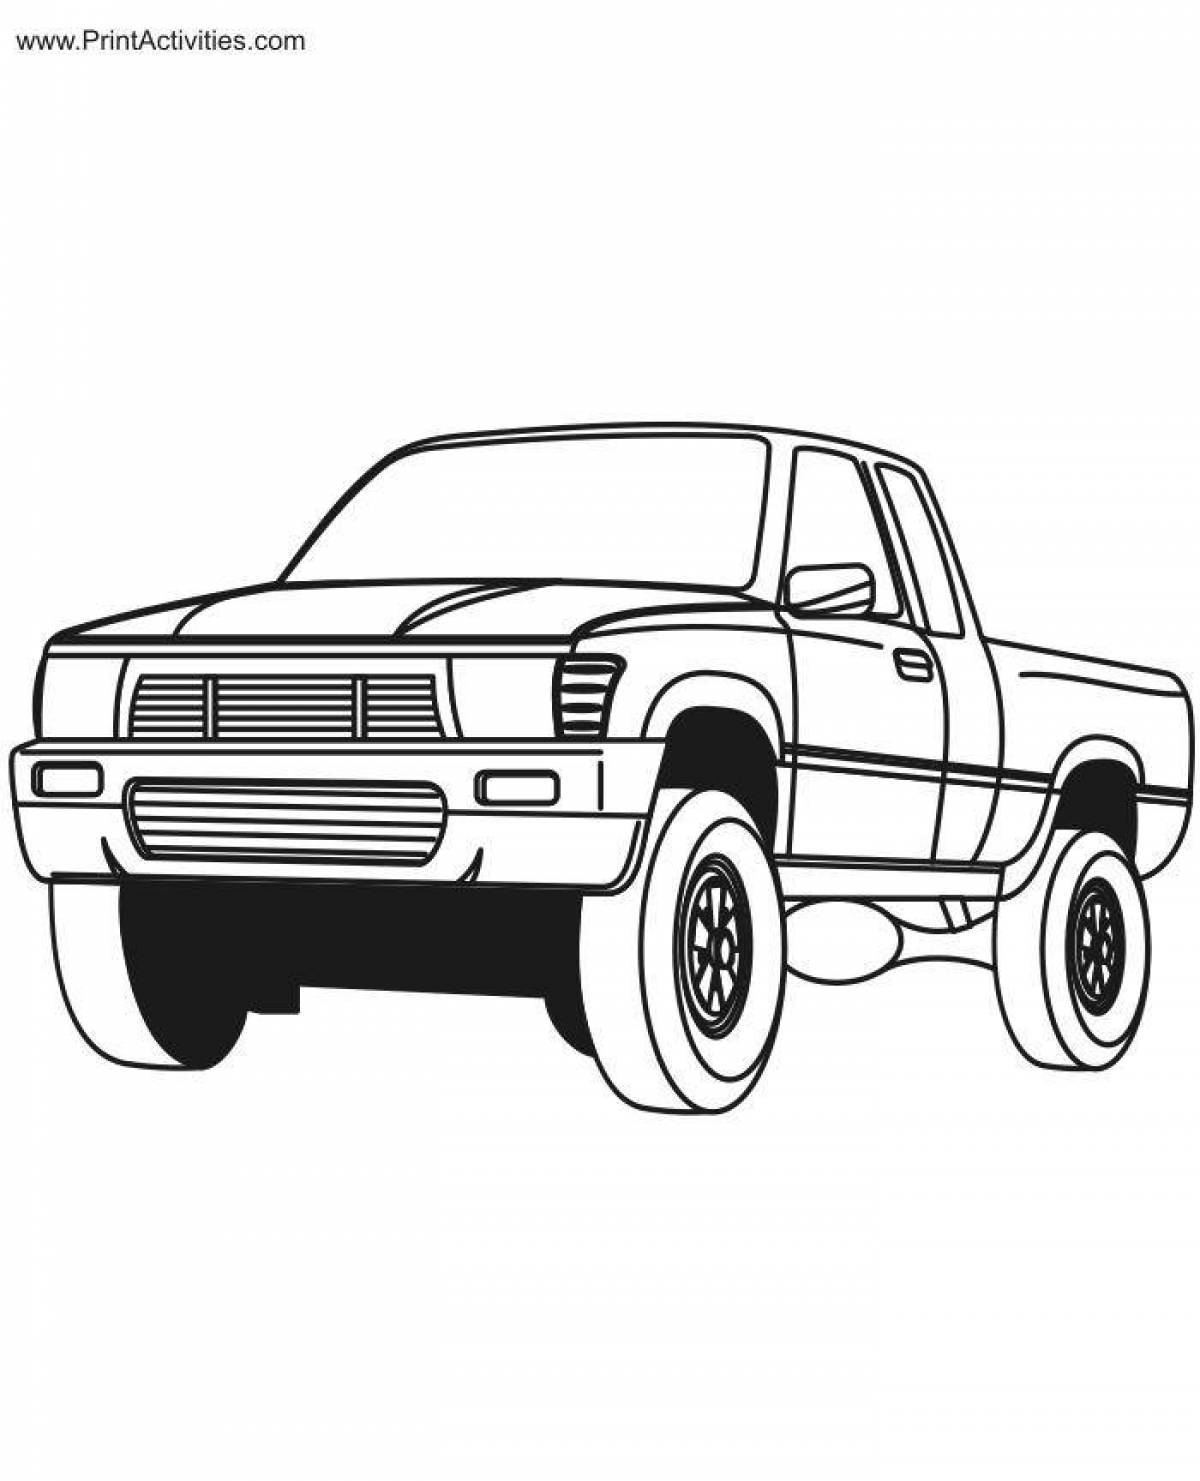 Attractive pickup truck coloring book